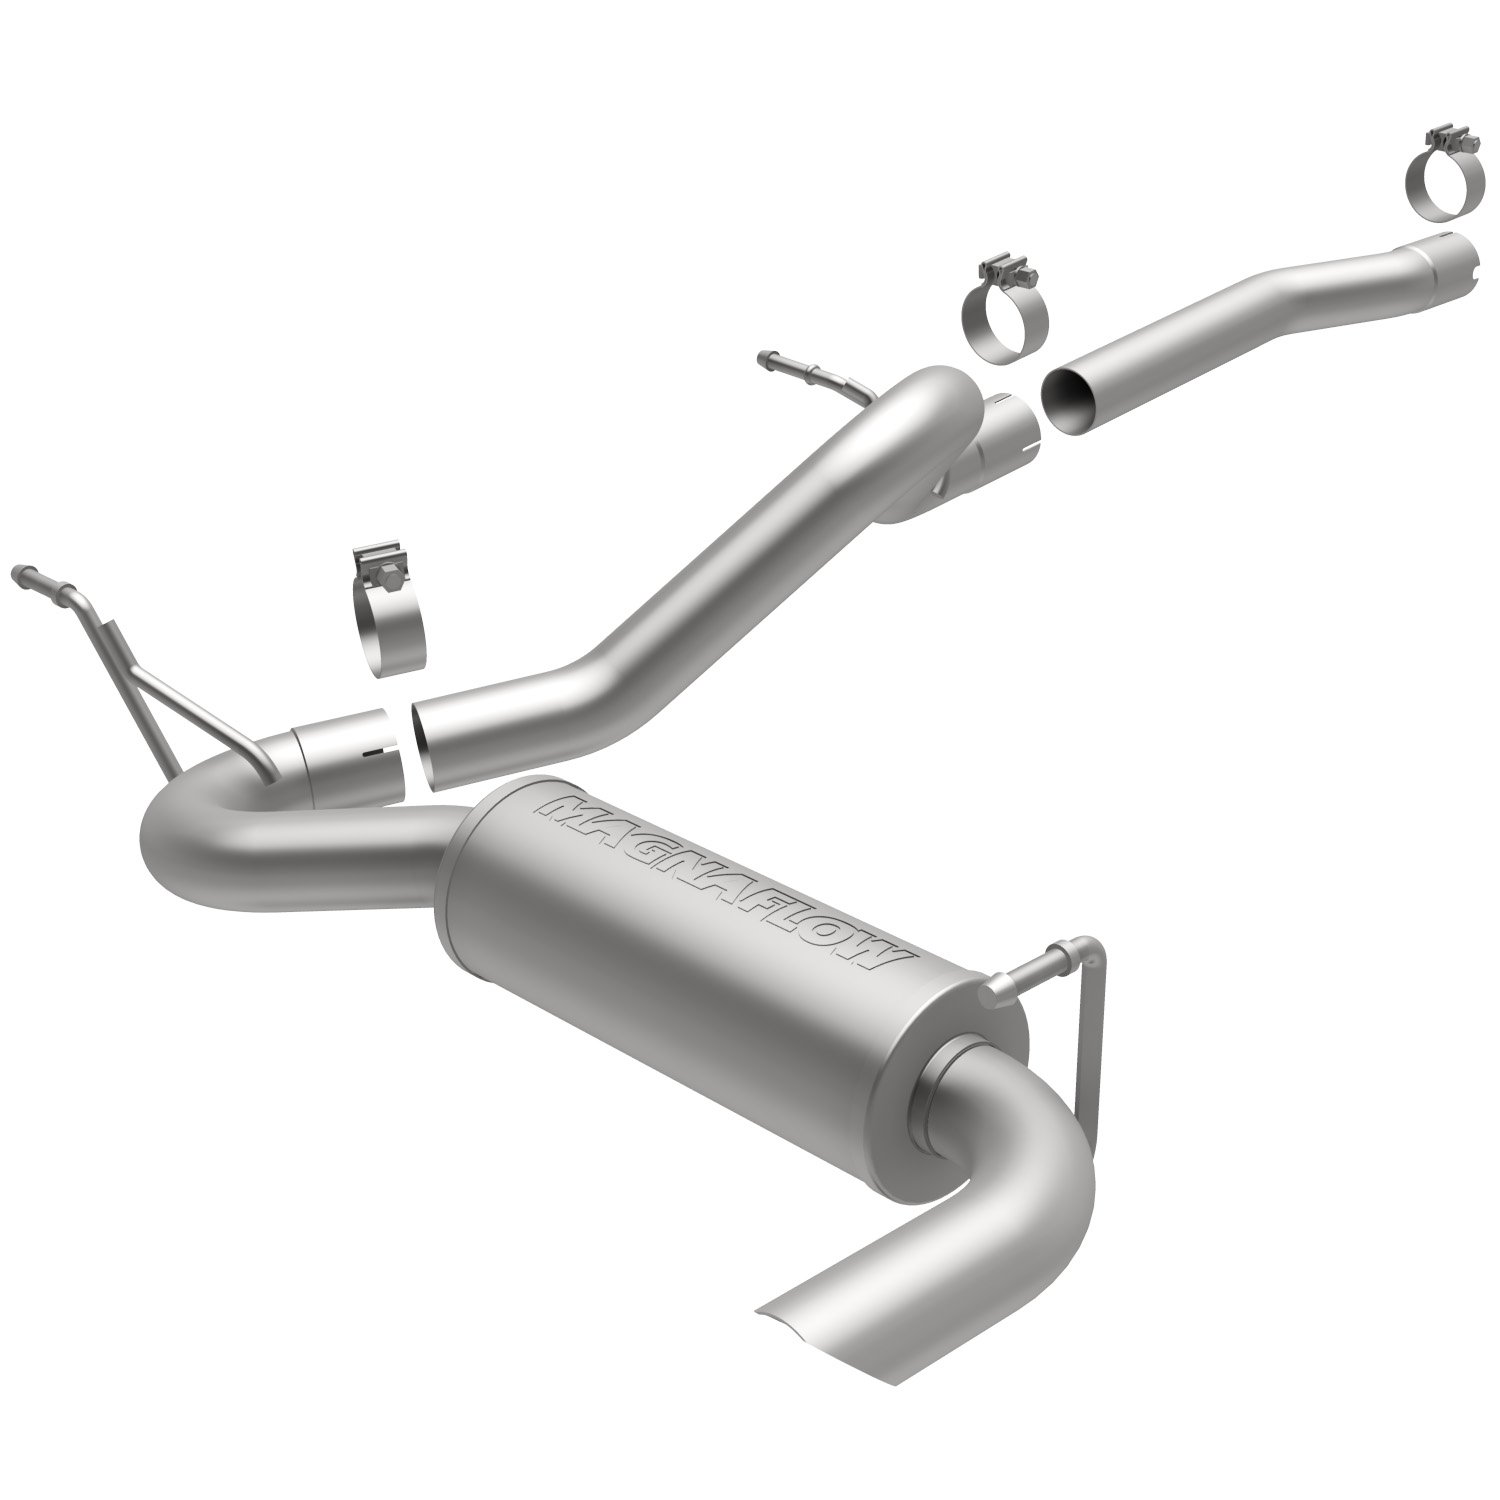 MagnaFlow Competition Diesel Exhaust System